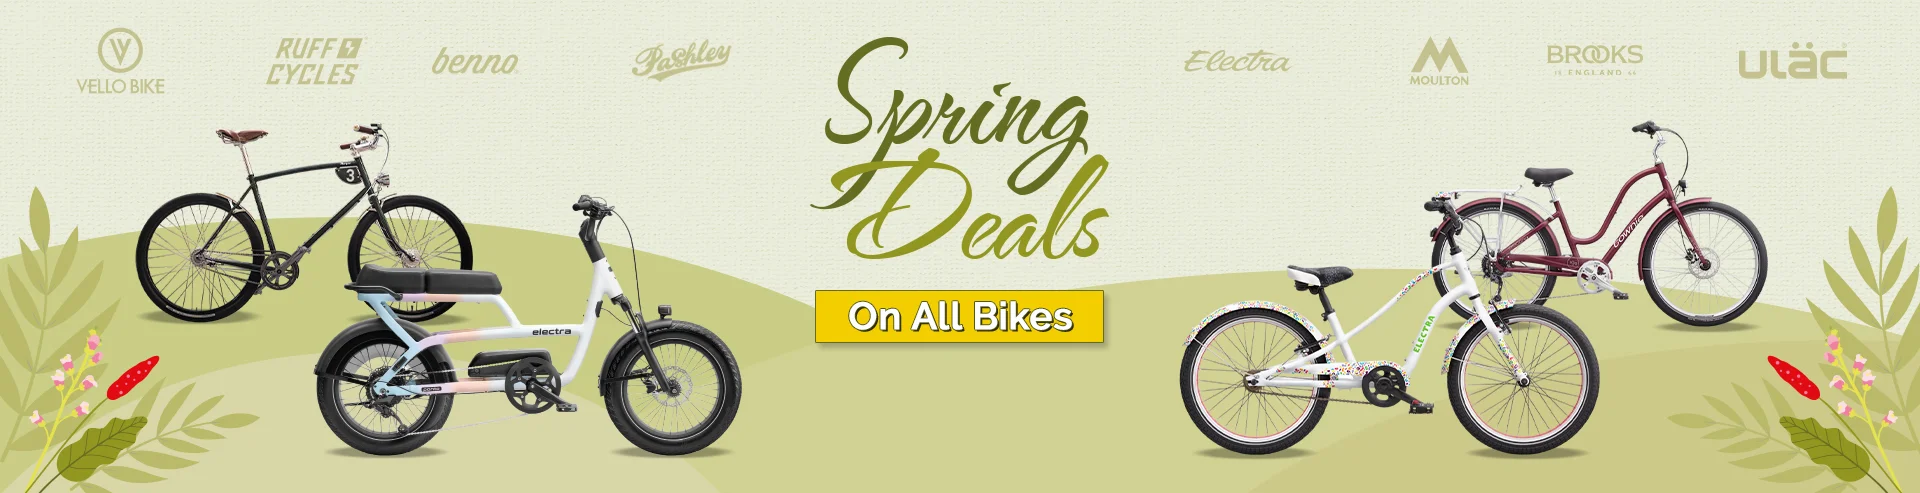 VM-Hero-Electra and Wowbikes-Spring Deal-1920x493.webp